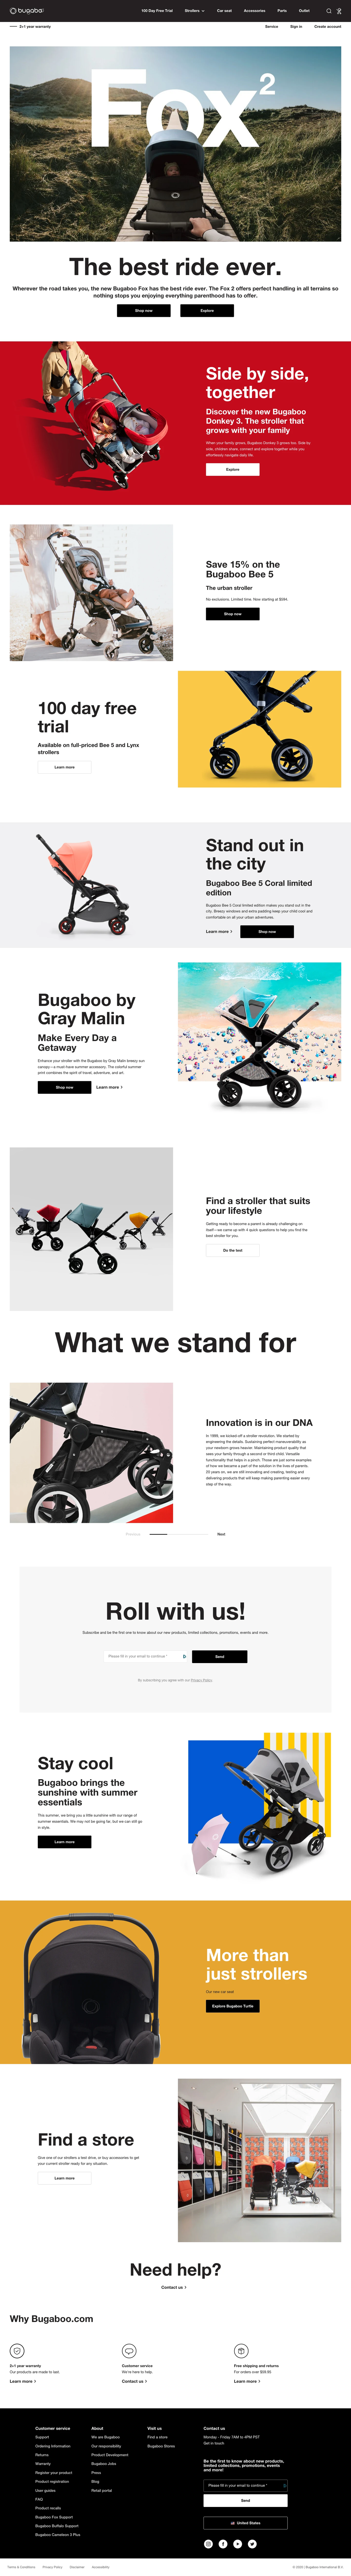 Bugaboo Landing Page Example: Discover all Bugaboo strollers, car seats, and accessories to suit your lifestyle.